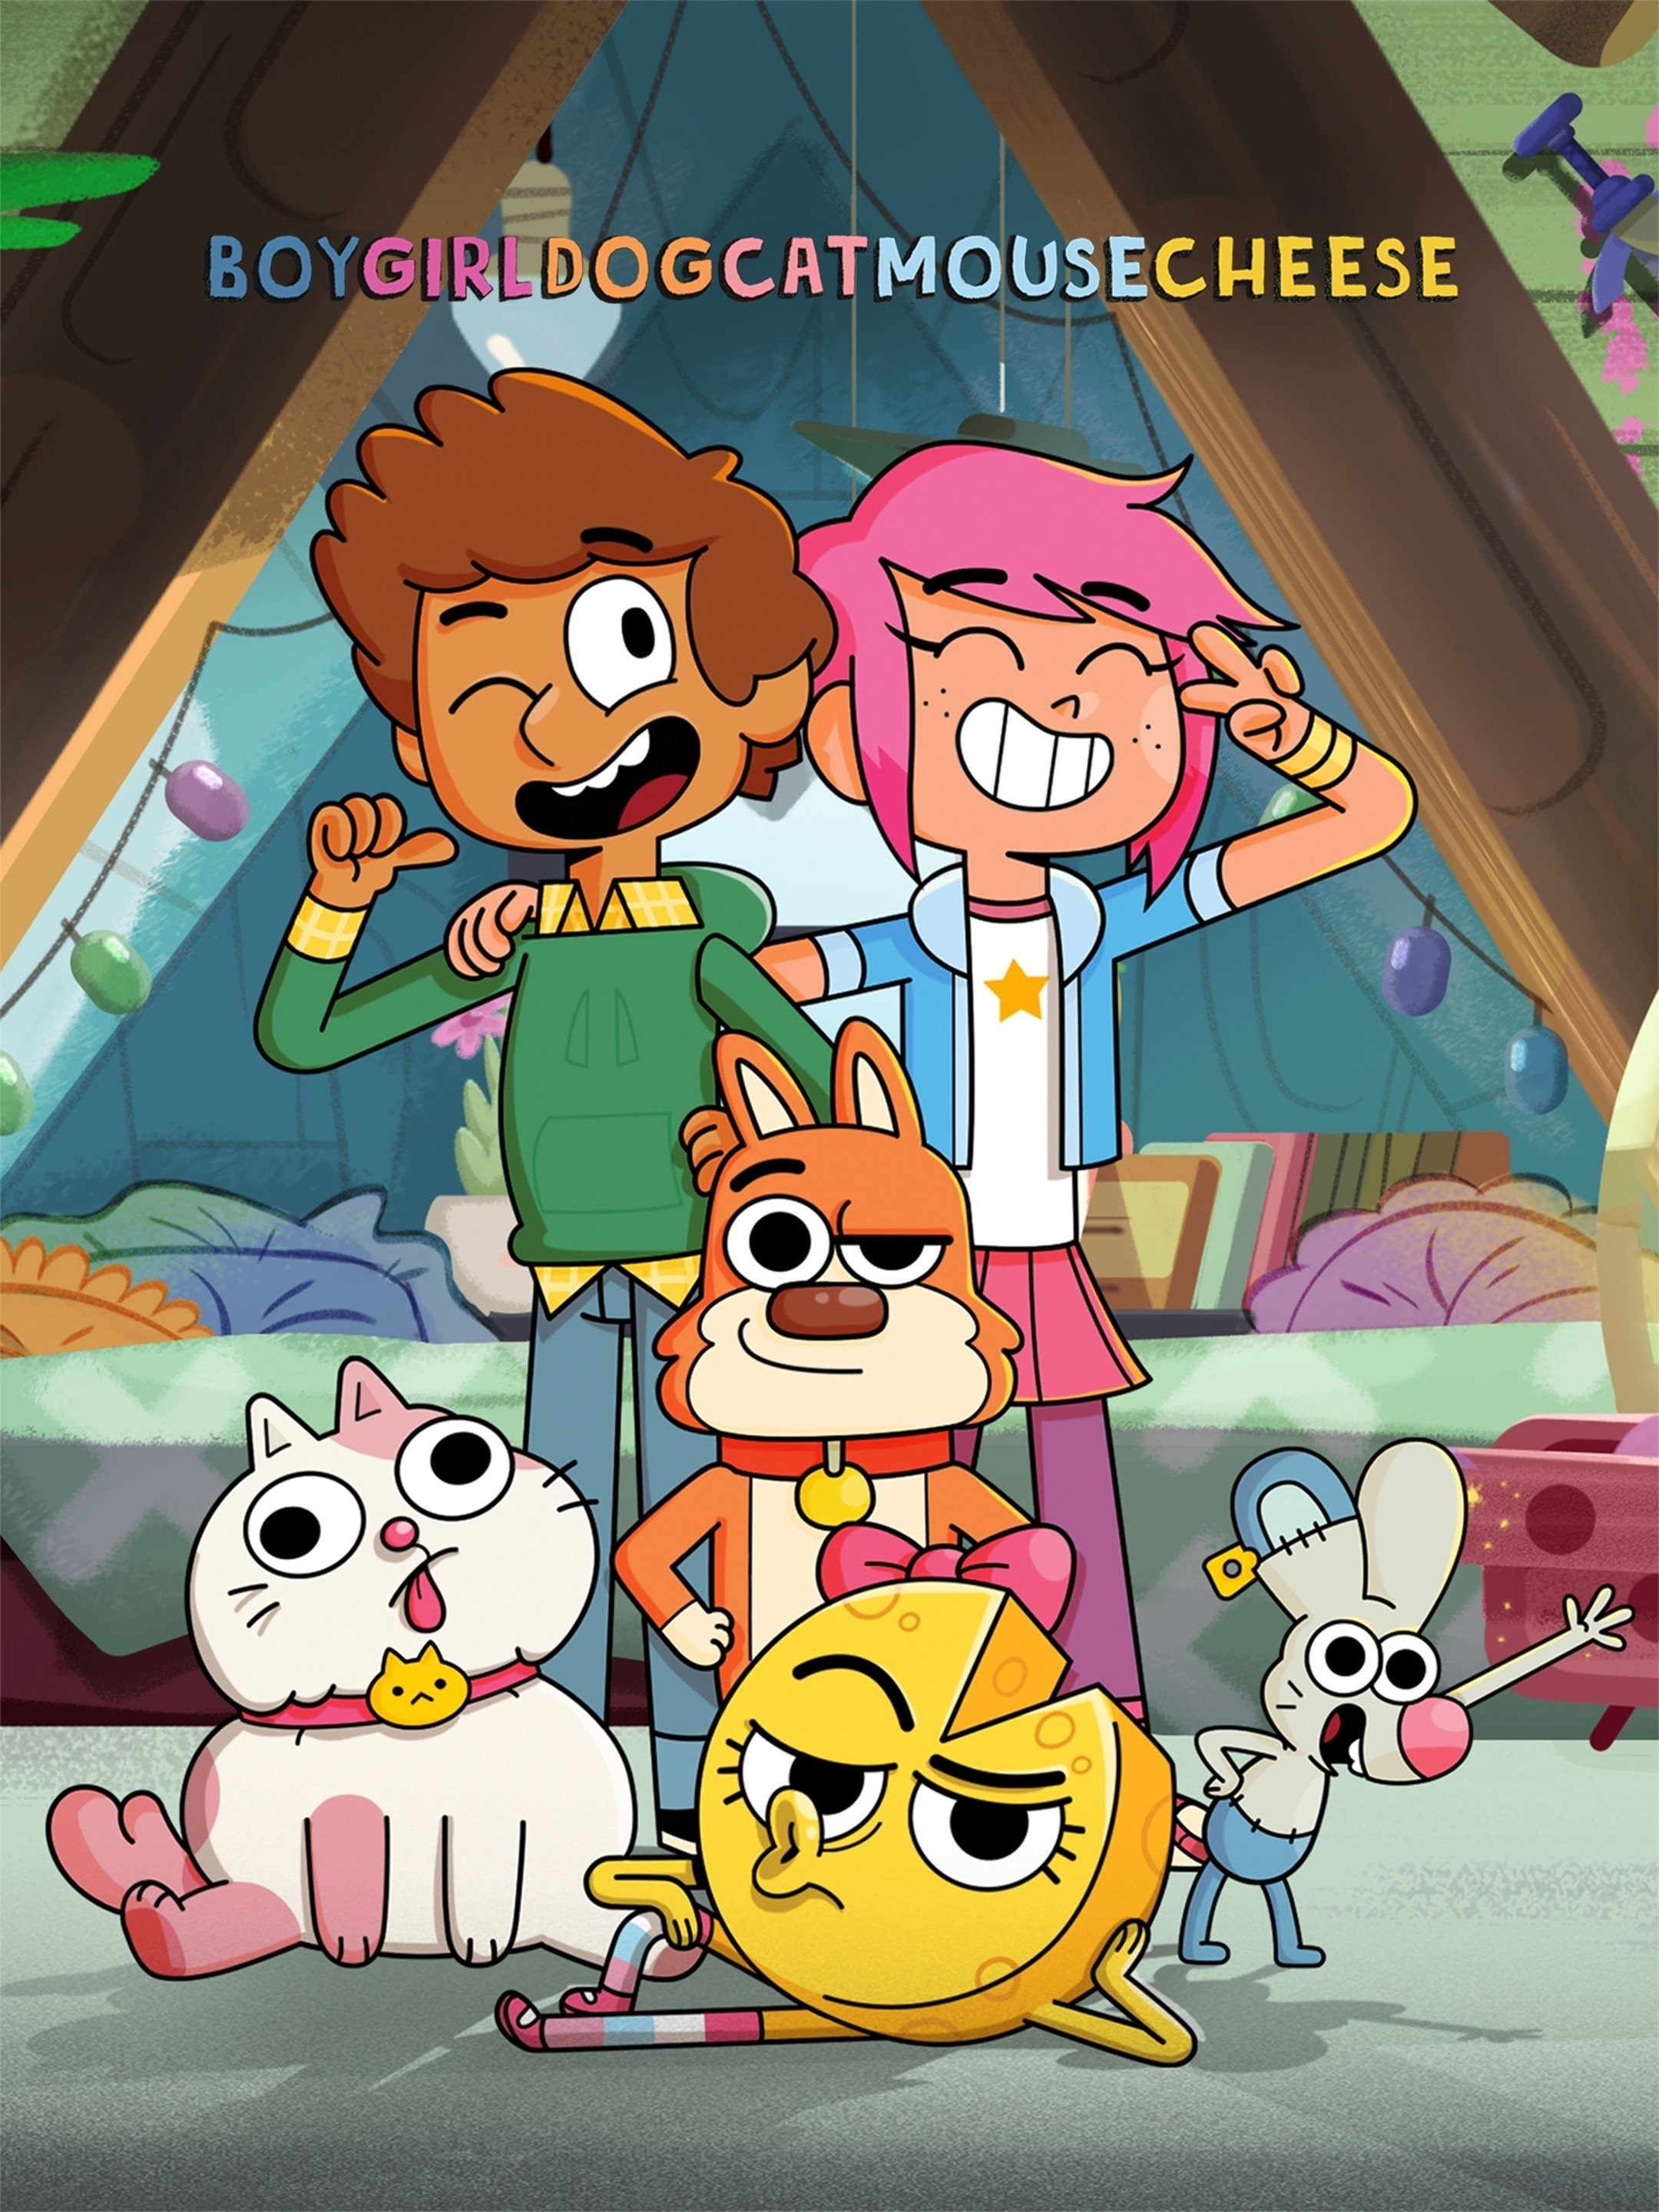 Boy Girl Dog Cat Mouse Cheese: Season 2 Pictures | Rotten Tomatoes